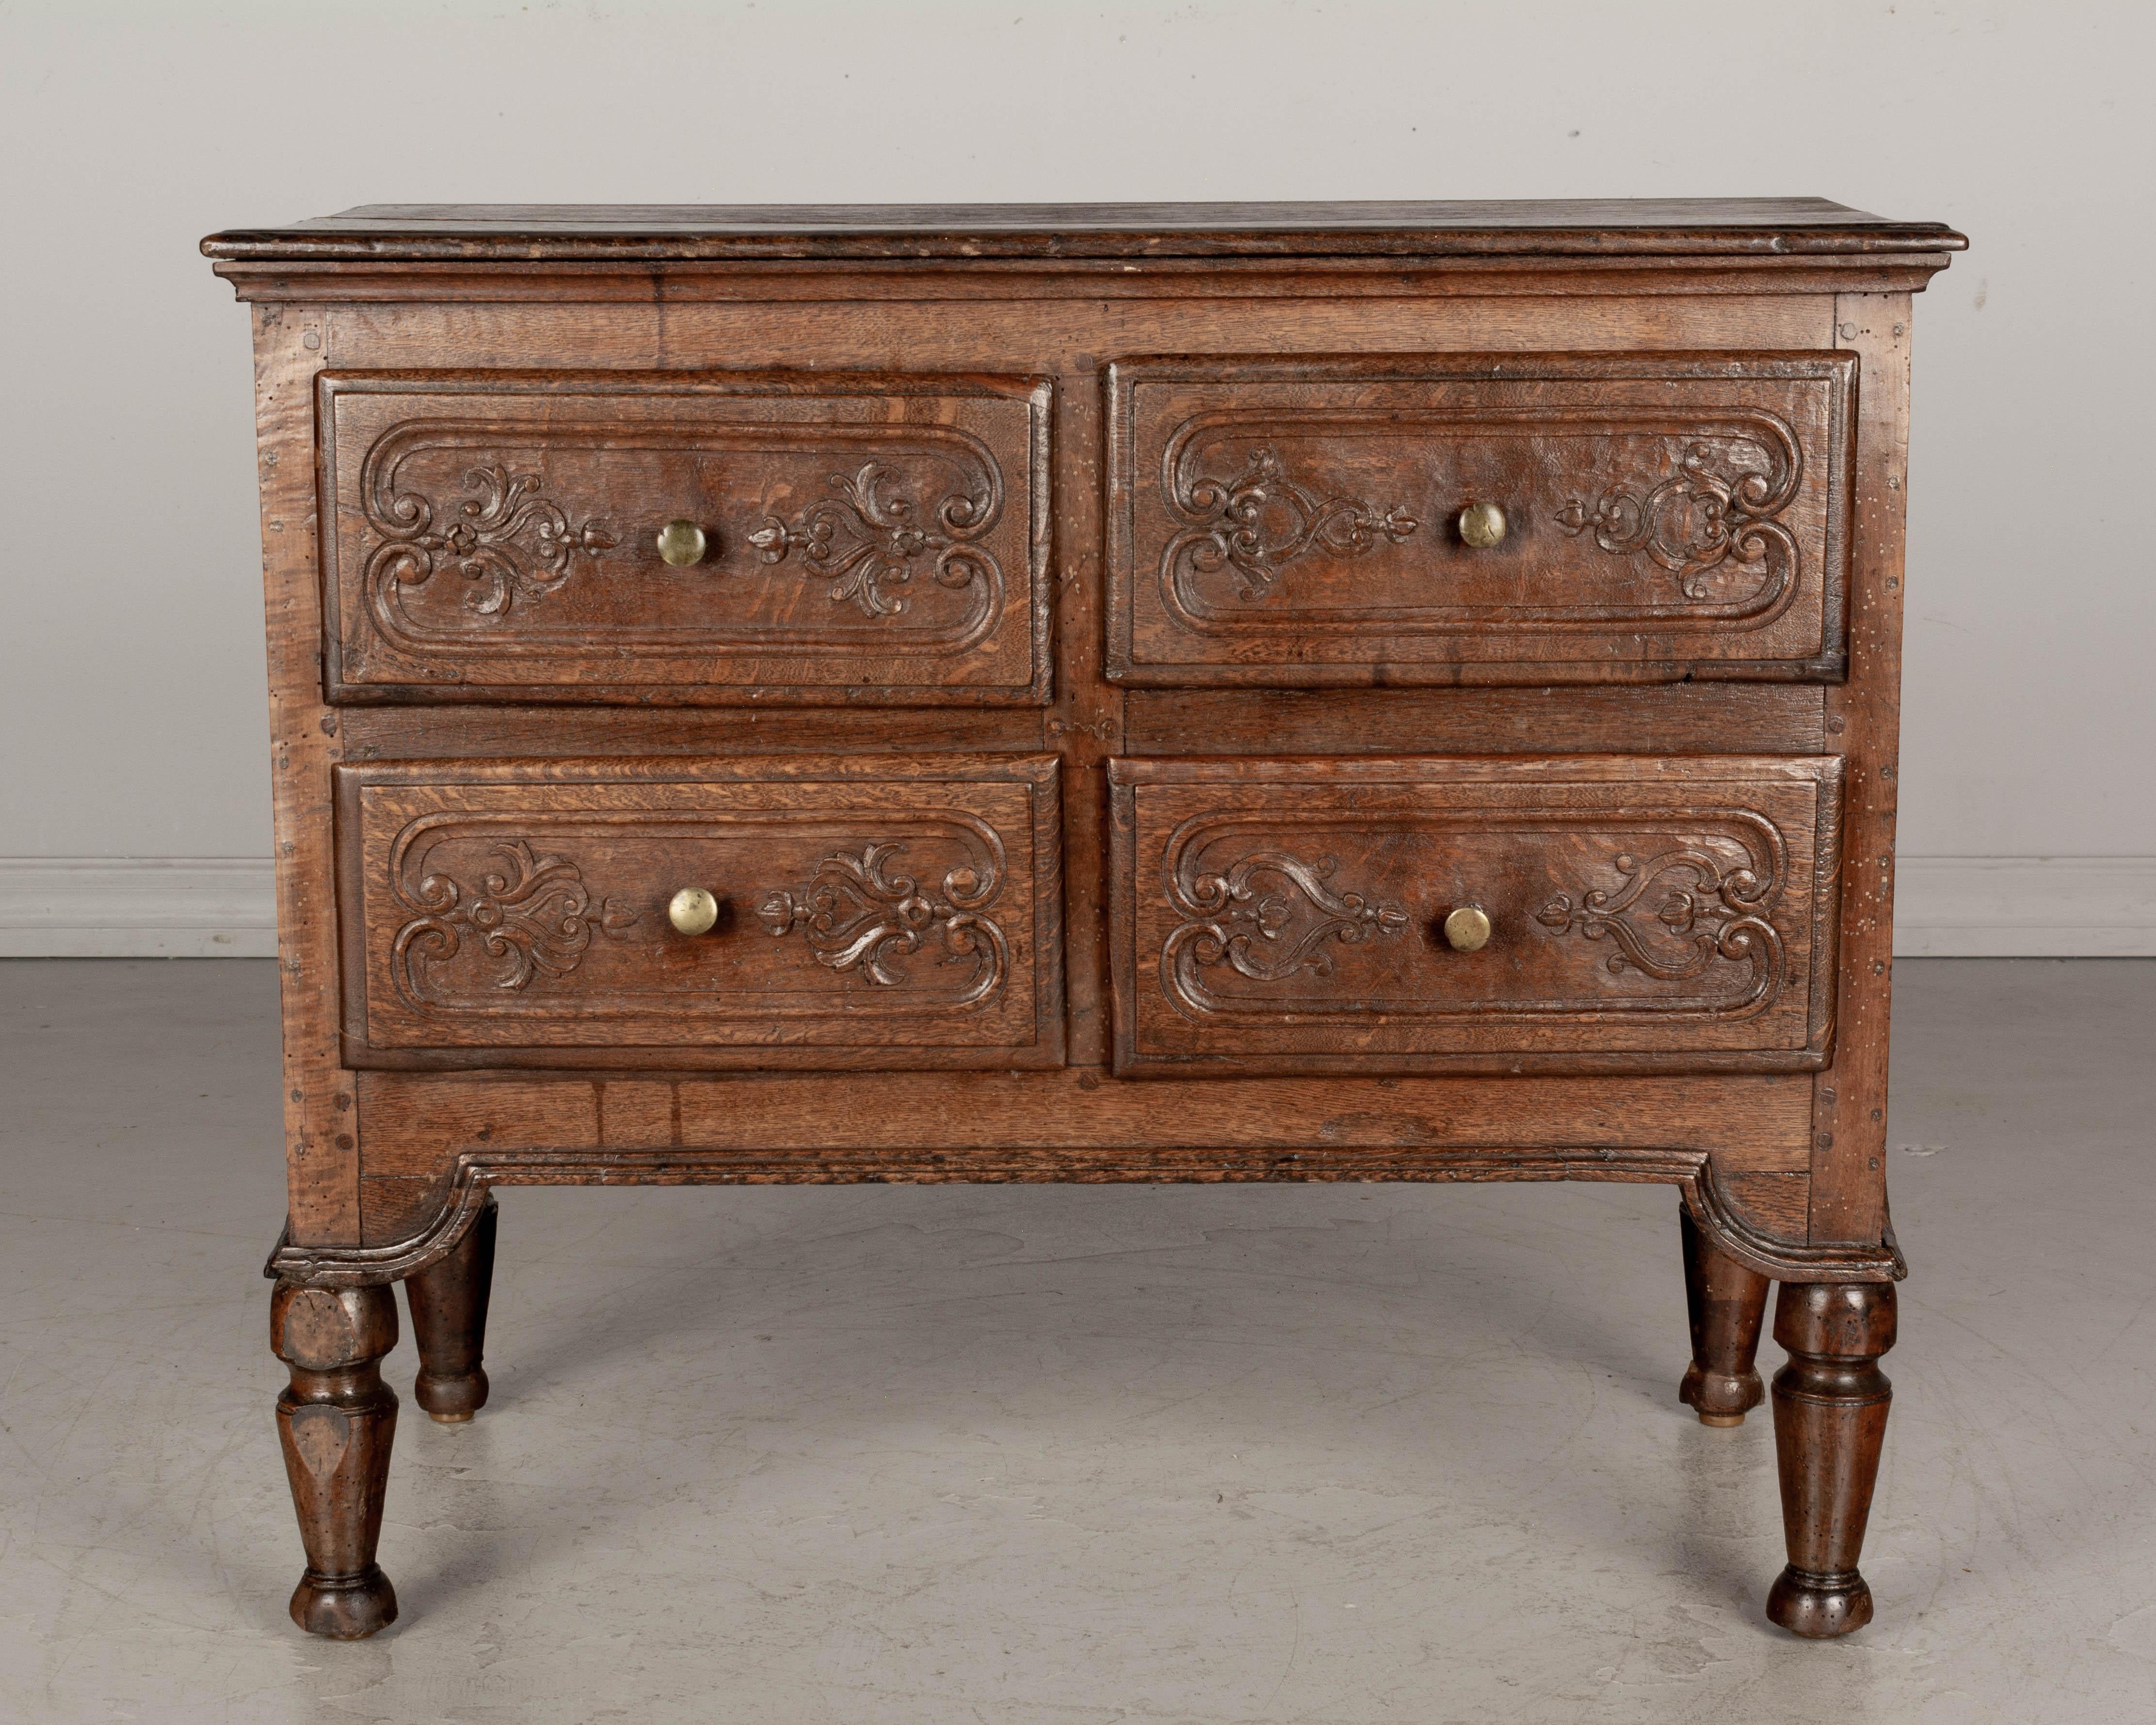 19th Century Louis XVI Style Petite Commode or Child' s Chest In Good Condition For Sale In Winter Park, FL